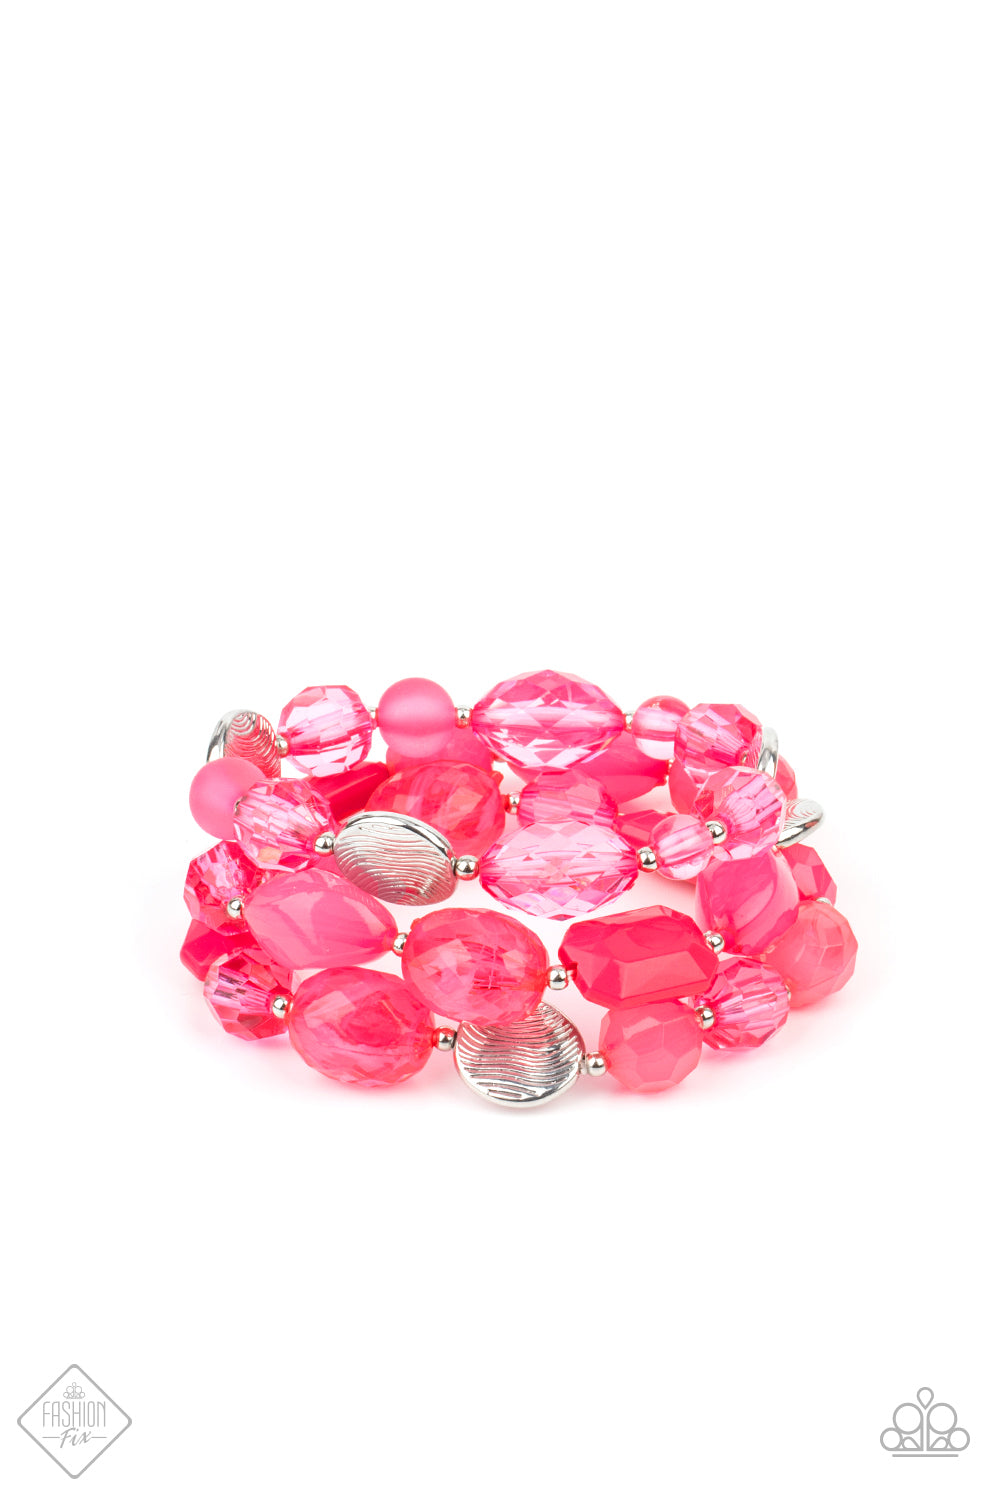 Oceanside Bliss - Pink Bracelets glassy and opaque Raspberry Sorbet crystal-like beads and textured silver accents are threaded along stretchy bands around the wrist, creating vivacious layers.  Sold as one individual bracelet.  Paparazzi Jewelry is lead and nickel free so it's perfect for sensitive skin too!